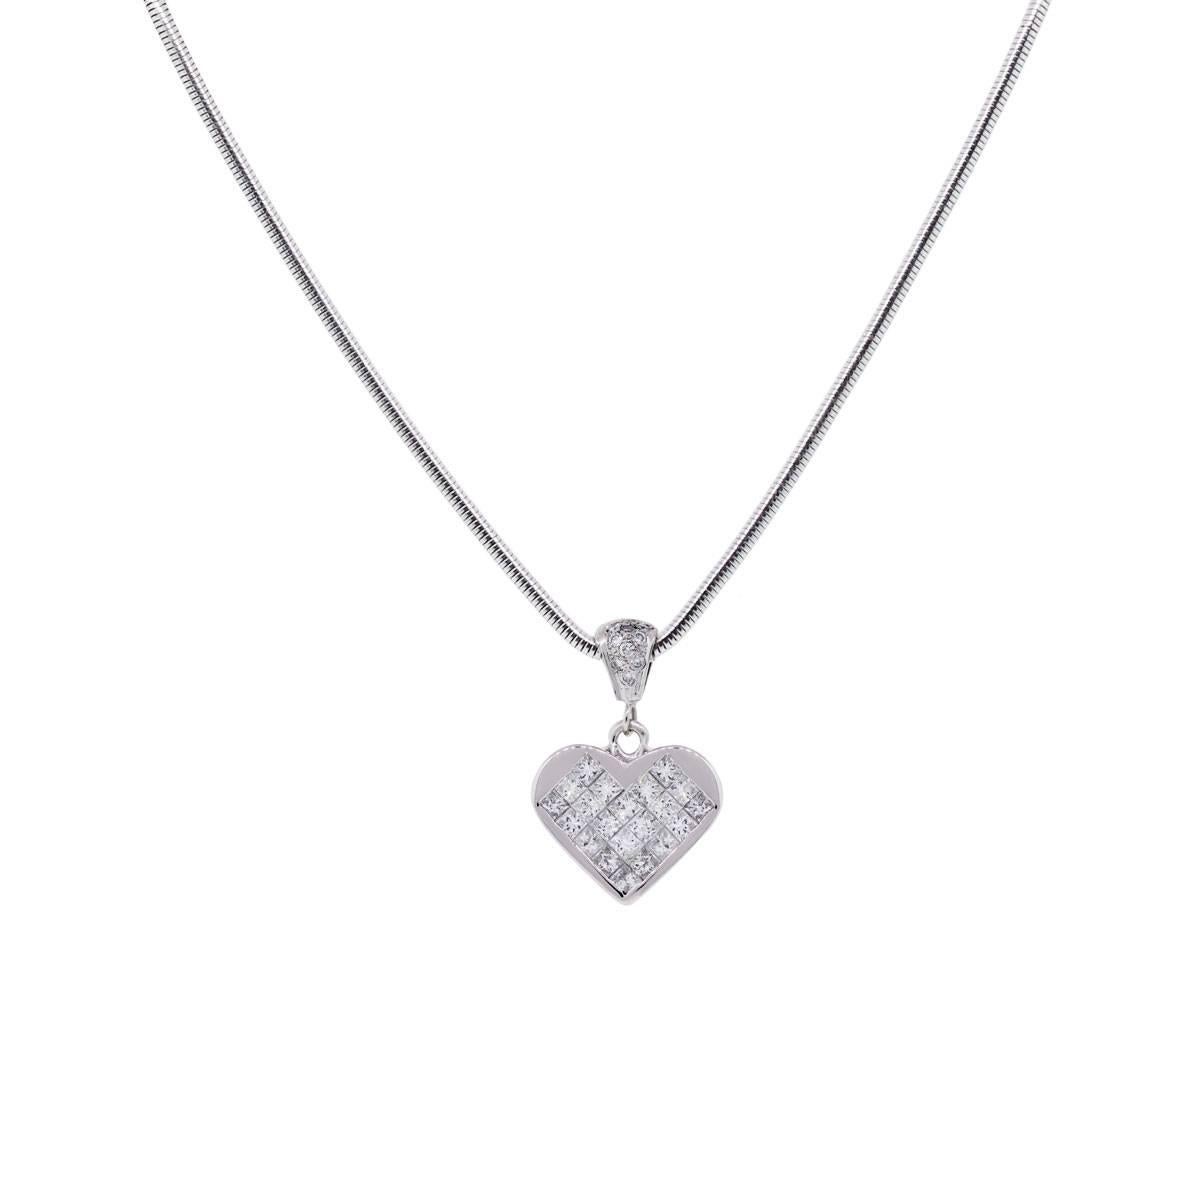 Material: 18k white gold
Diamond Details: 1.70ctw of invisible set princess cut diamonds and round brilliant diamonds. Diamonds are G in color and VS in clarity.
Necklace Measurements: 14k white gold snake chain is 18″ in length
Pendant Dimensions: